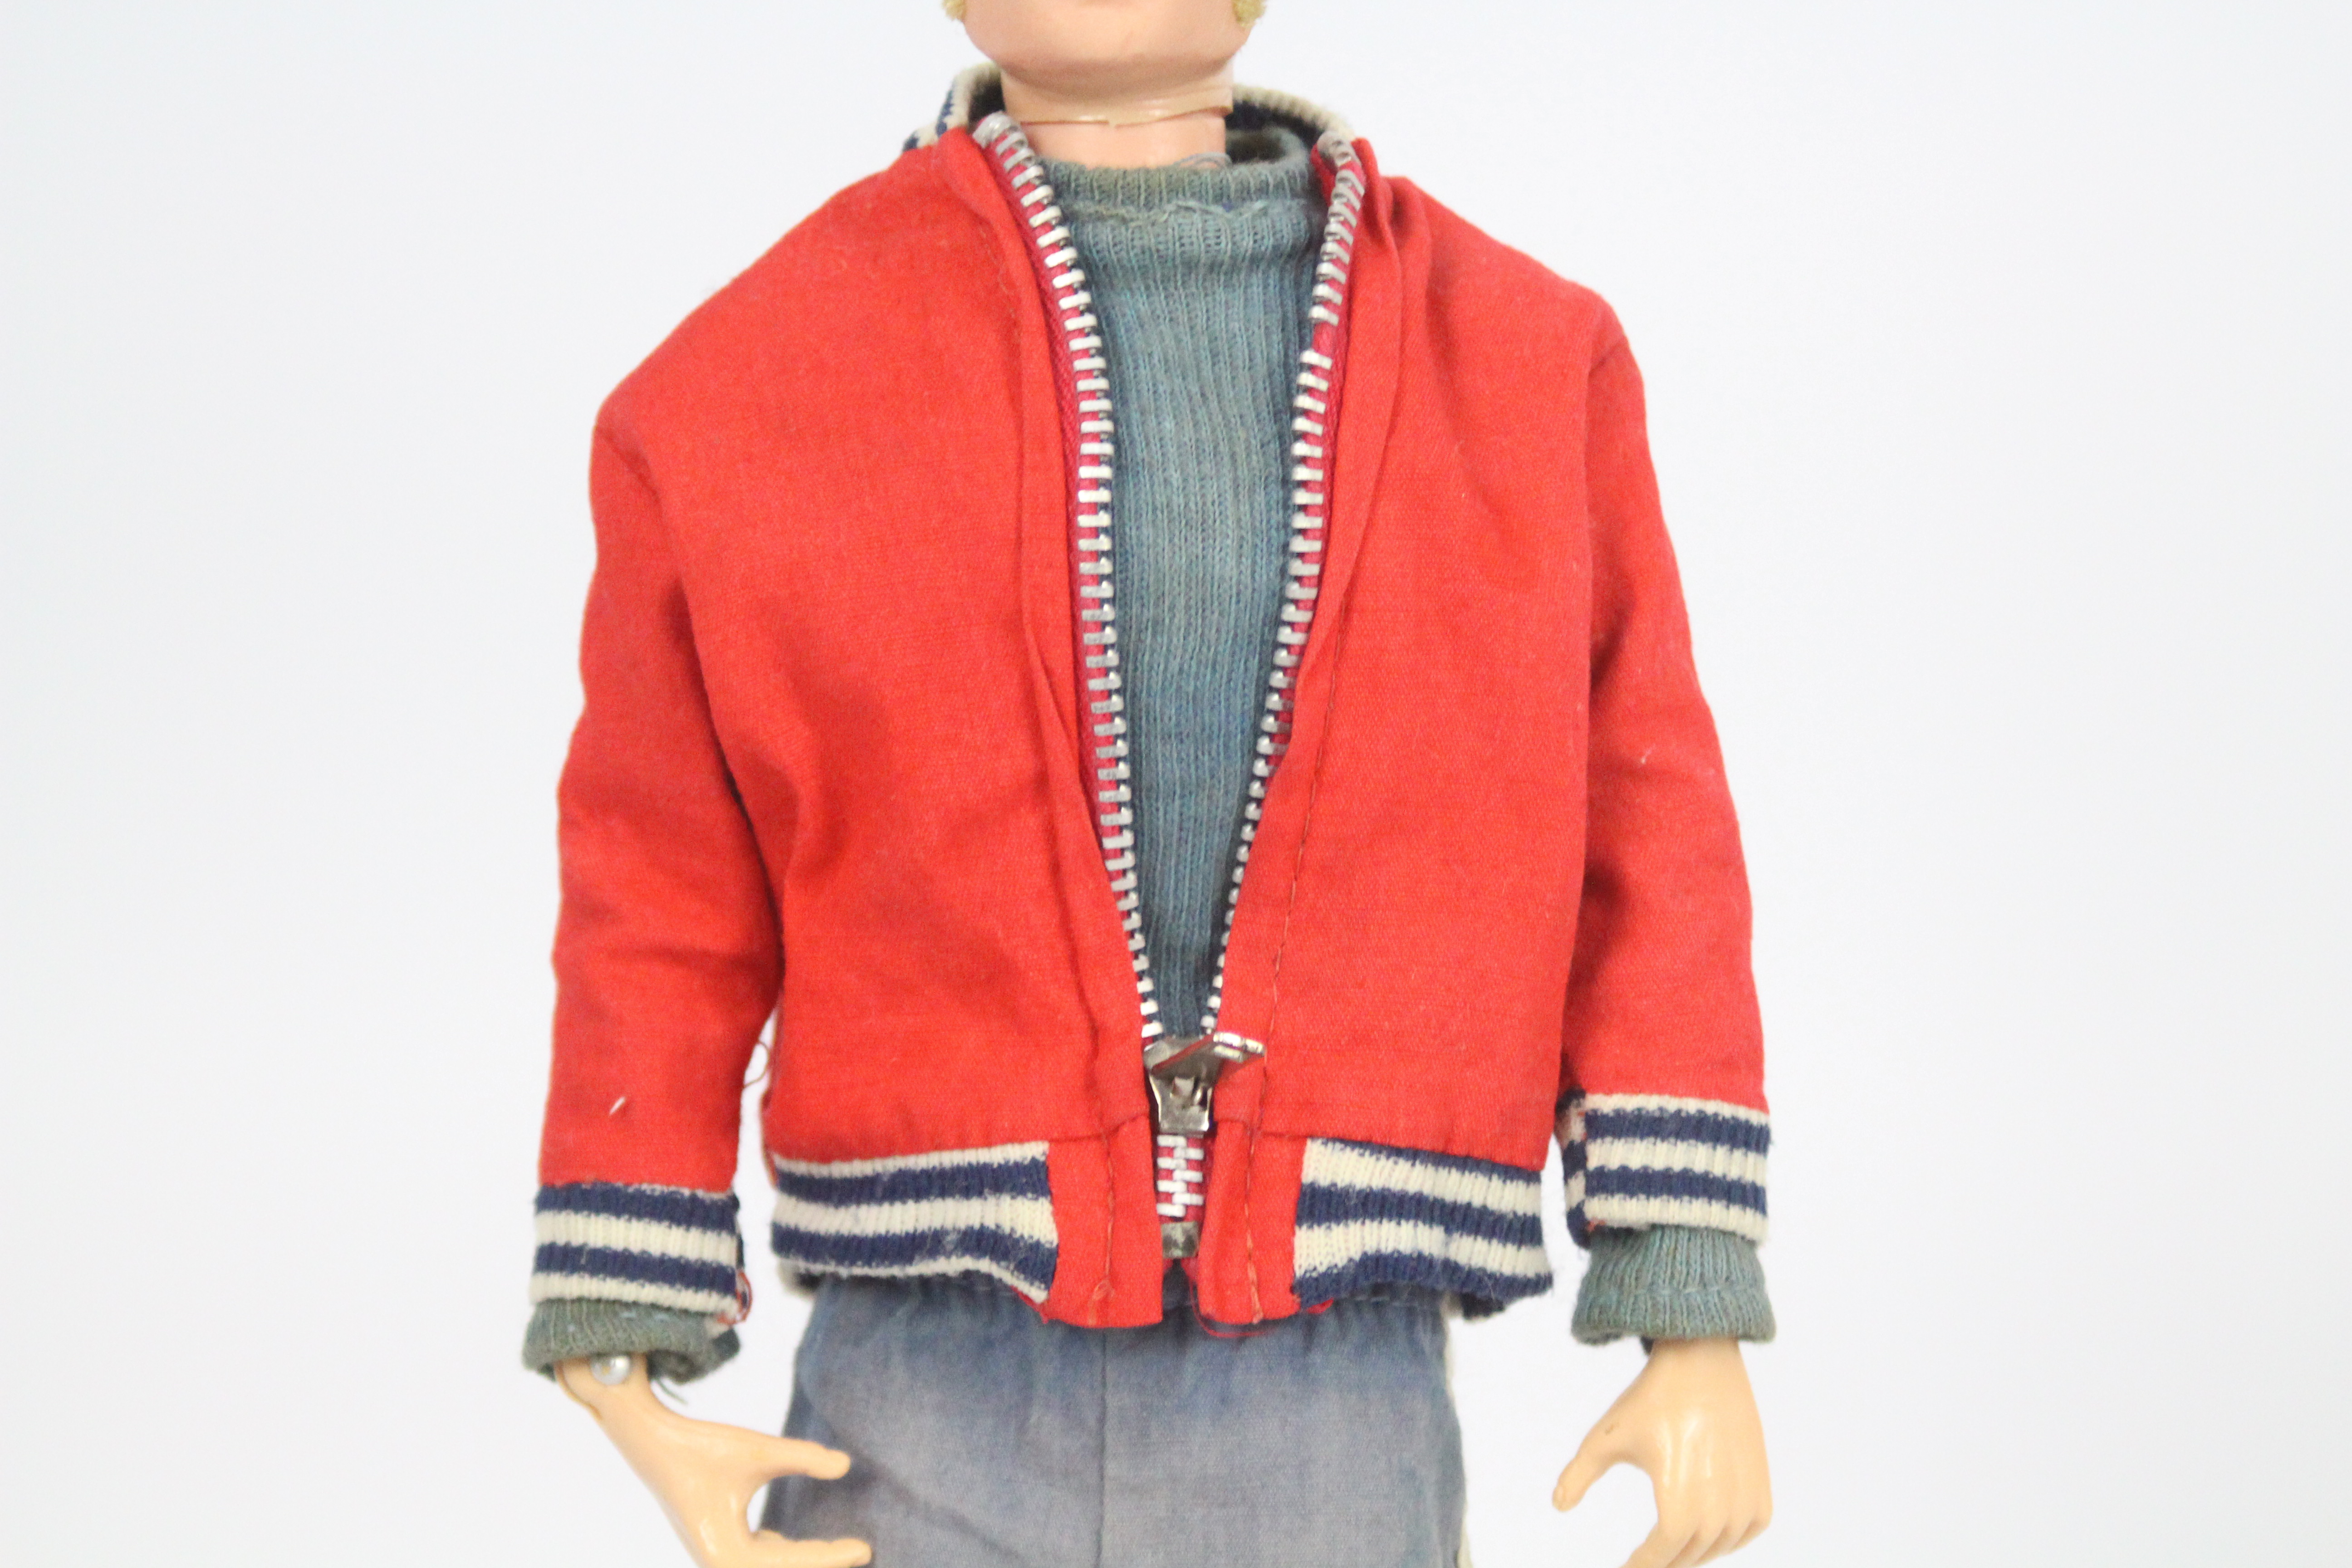 Palitoy, Action Man - A Palitoy Action Man Chelsea FC Footballer figure with sideburns. - Image 3 of 6